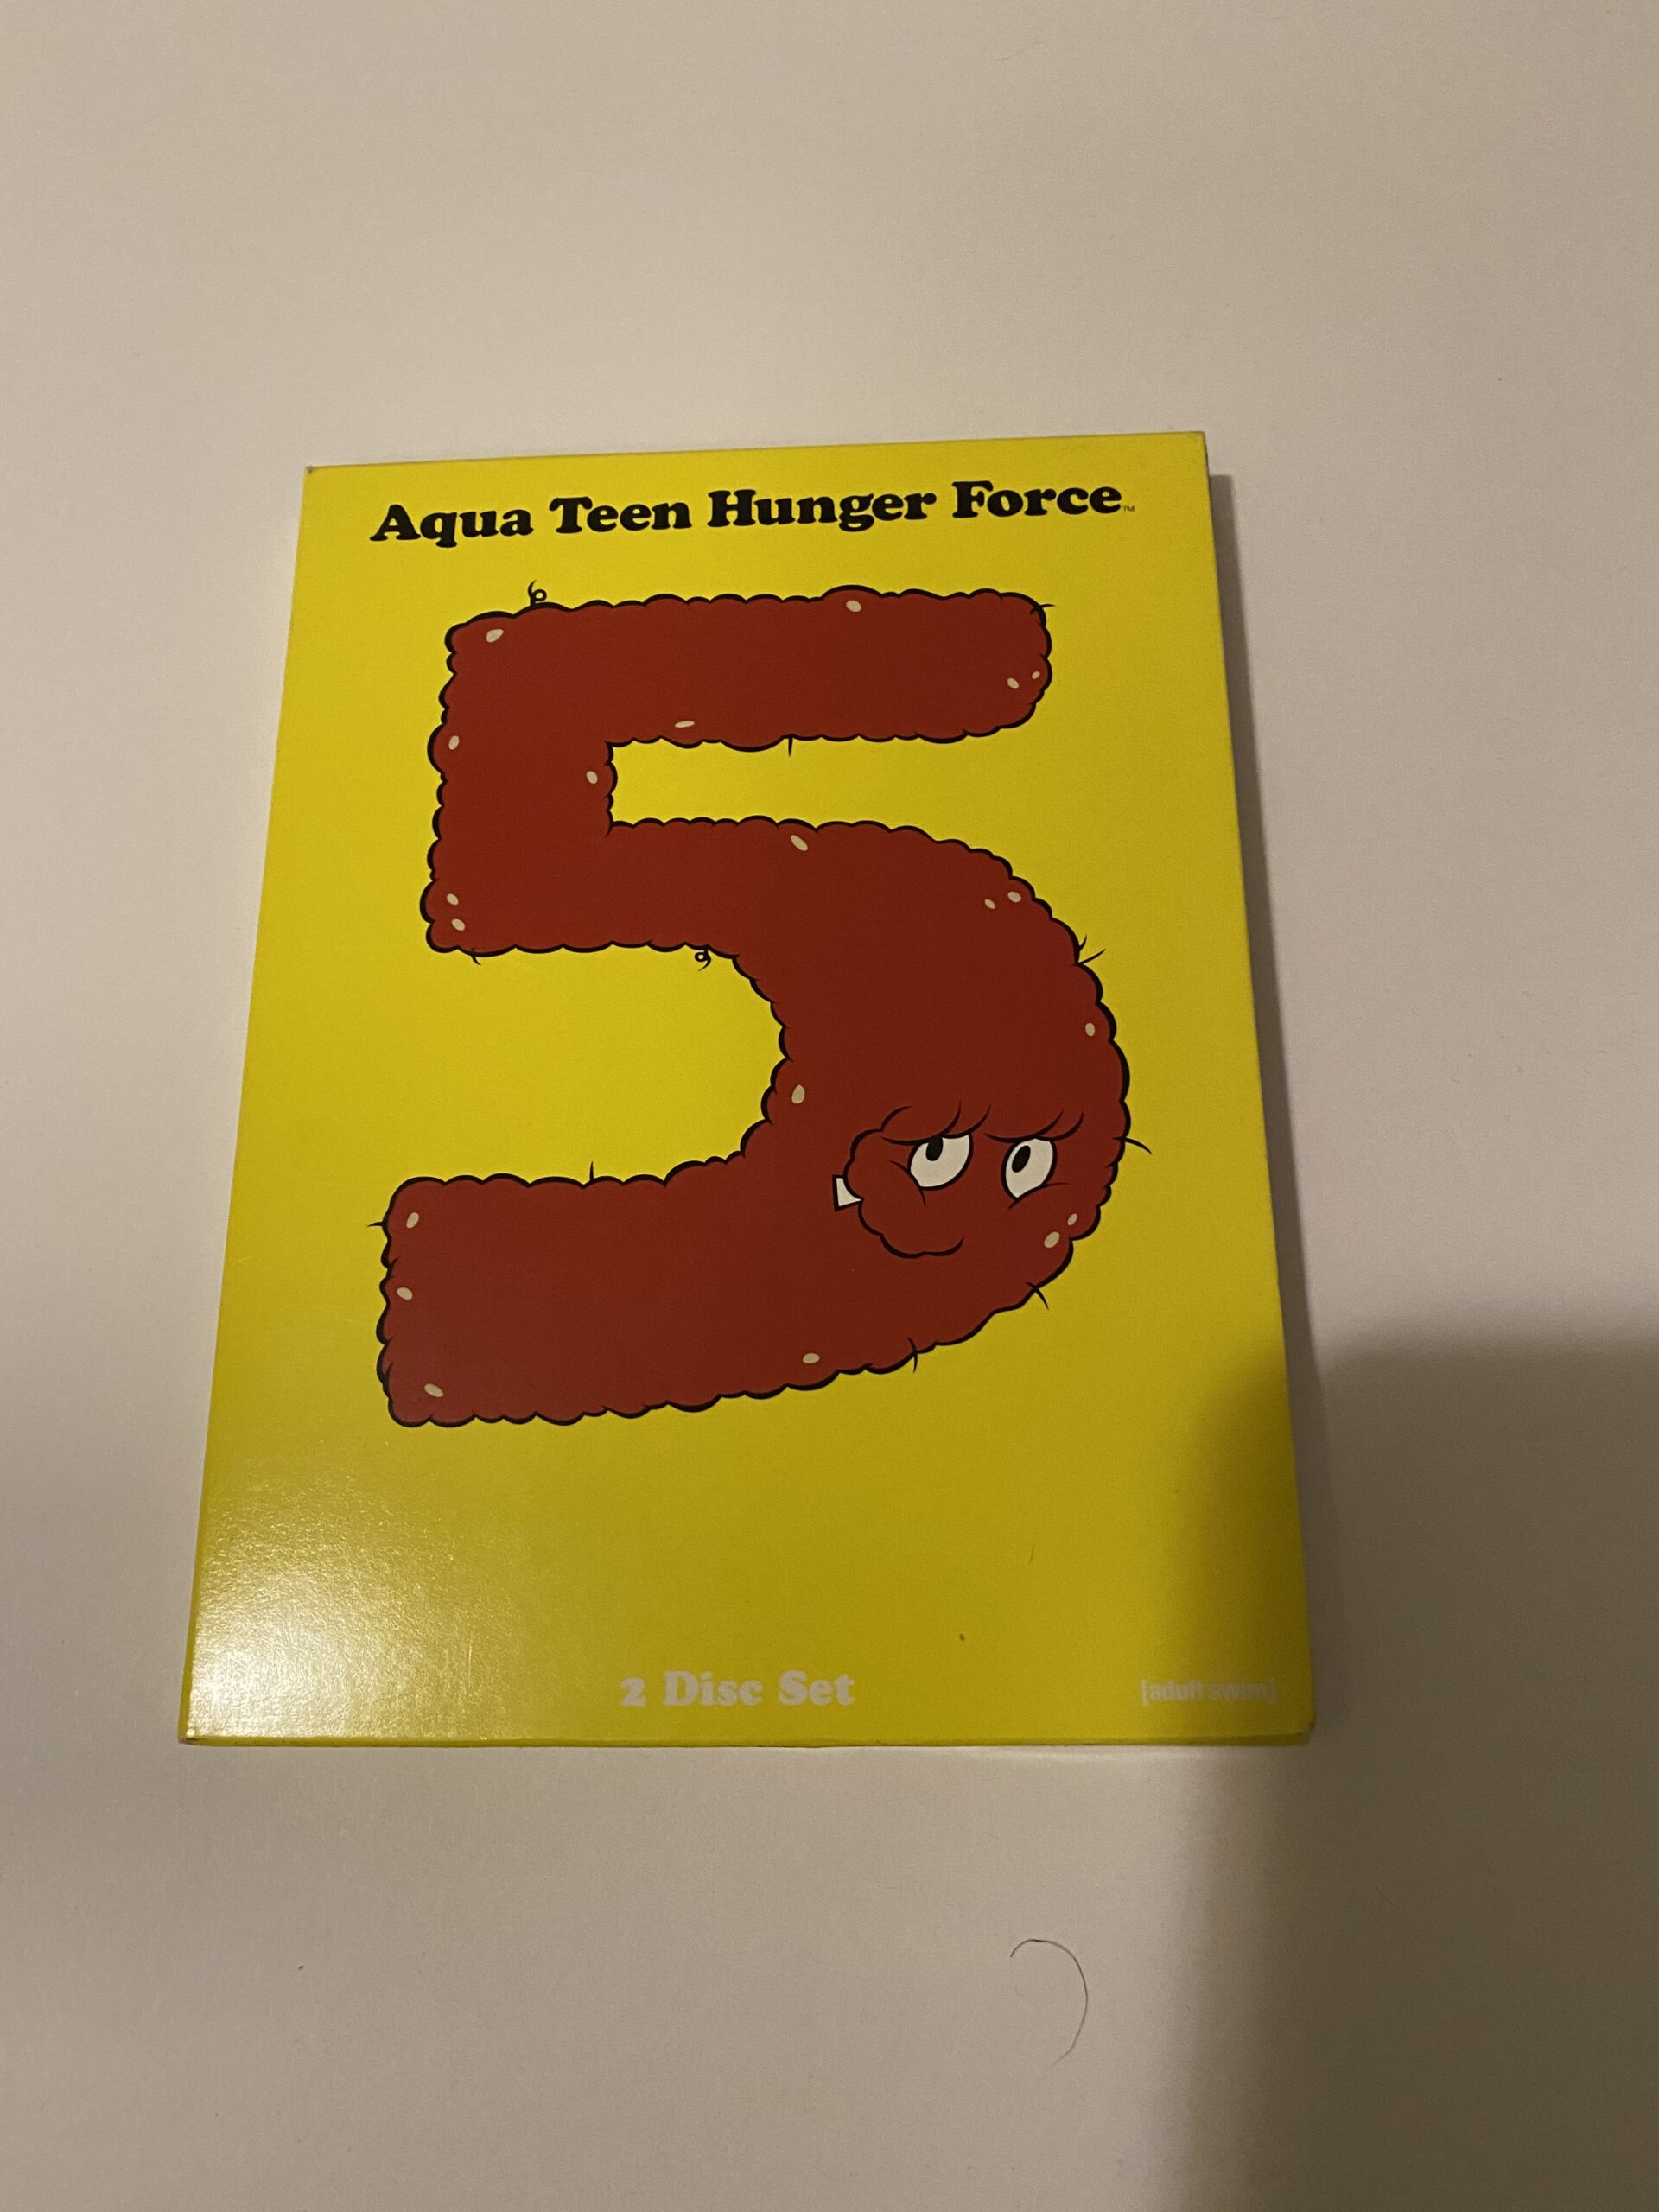 Aqua Teen Hunger Force Season 5 (Used Excellent Condition)